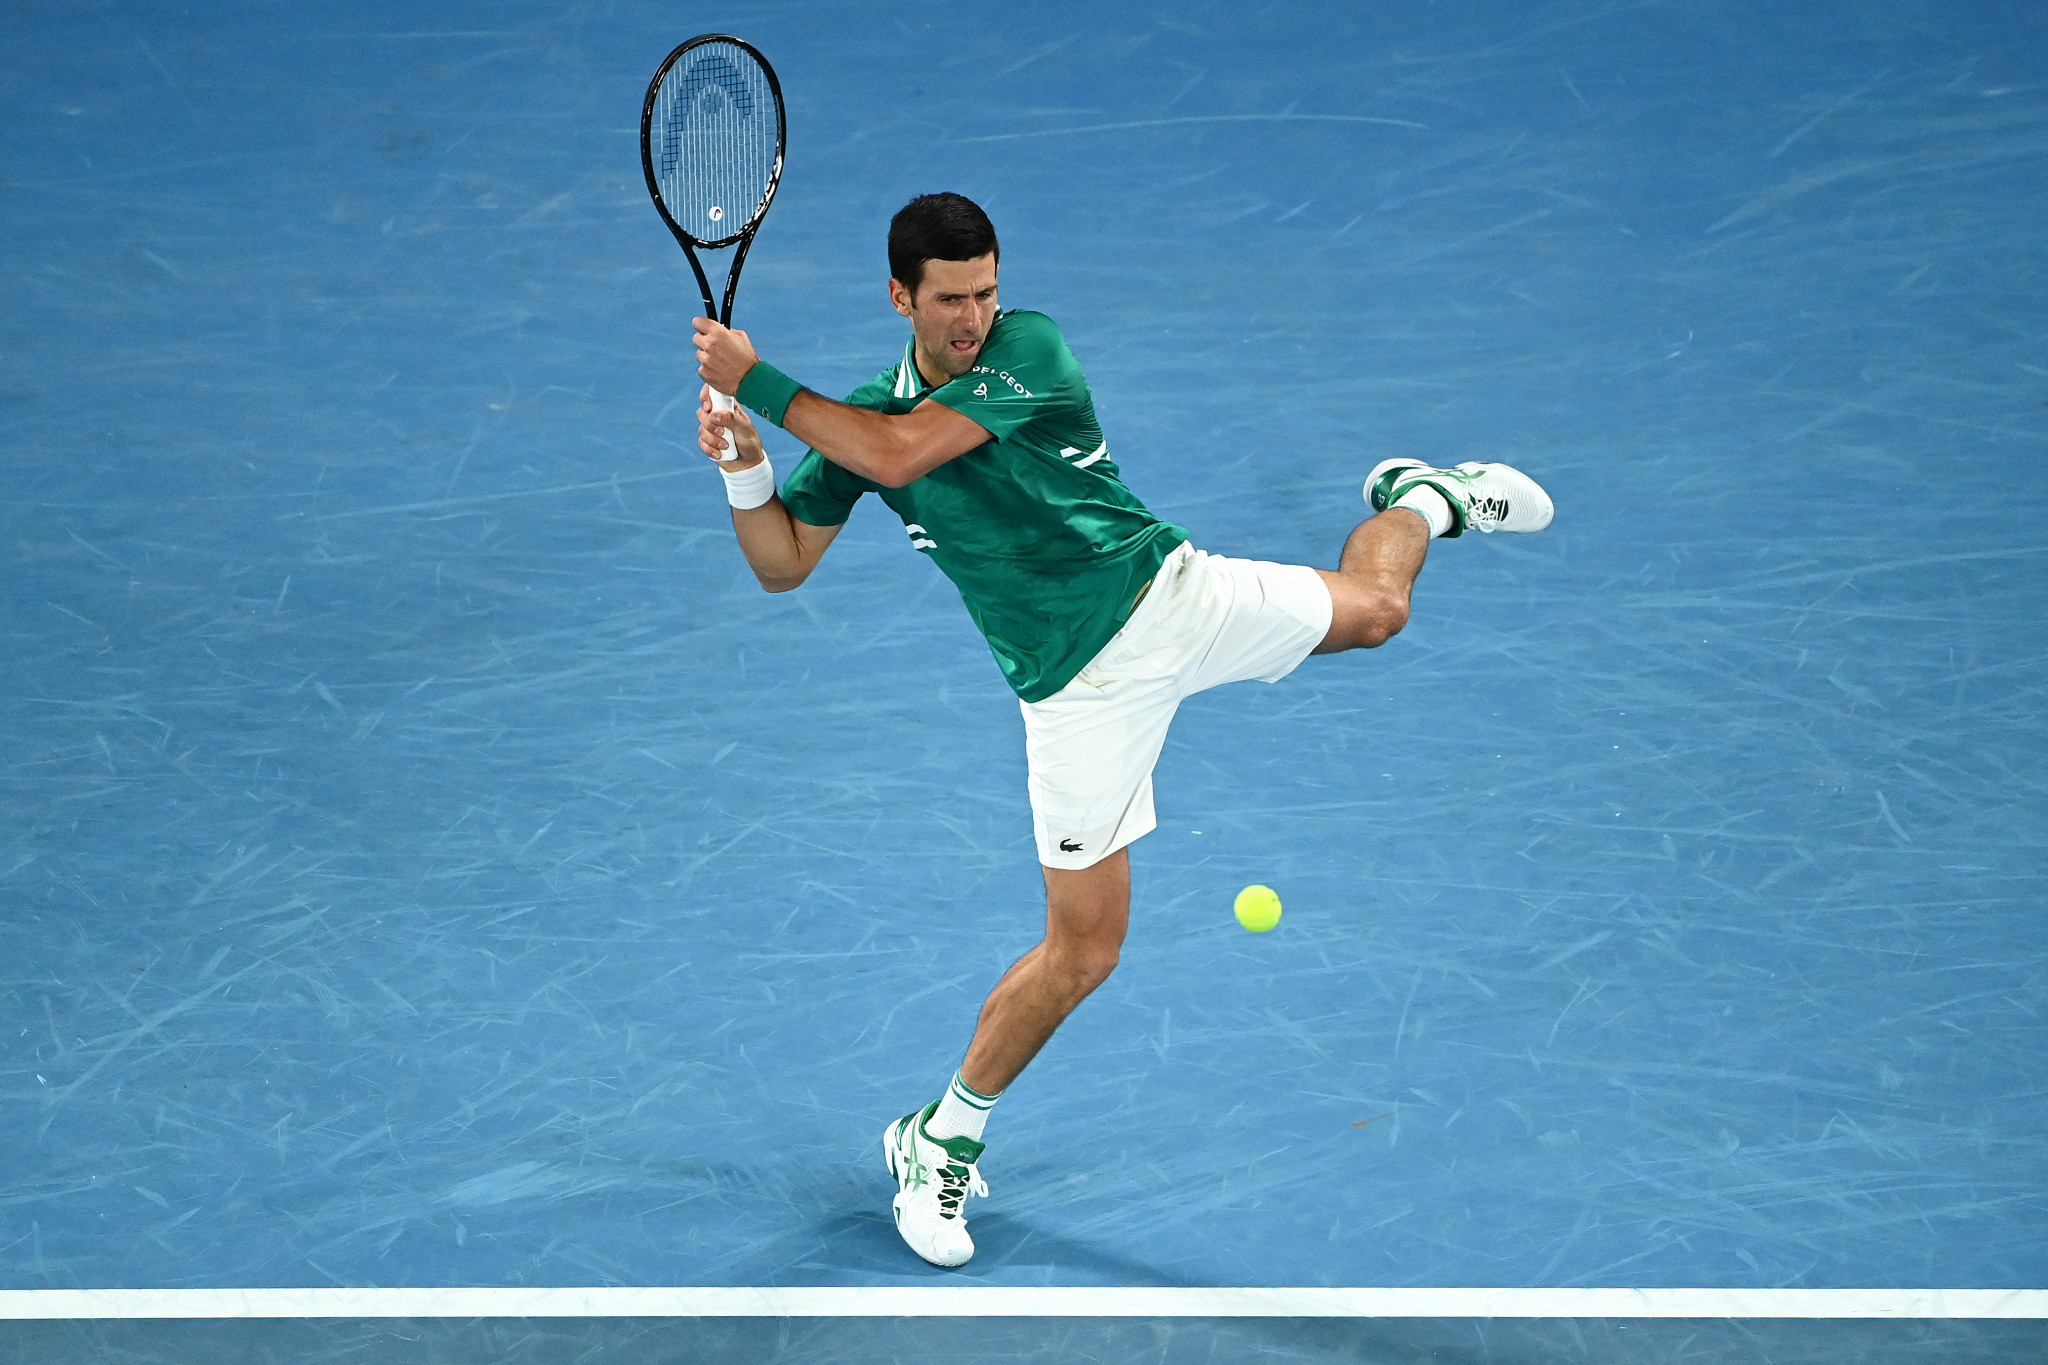 Men's top seed Novak Djokovic was among the opening day winners at the Australian Open in Melbourne ©Getty Images